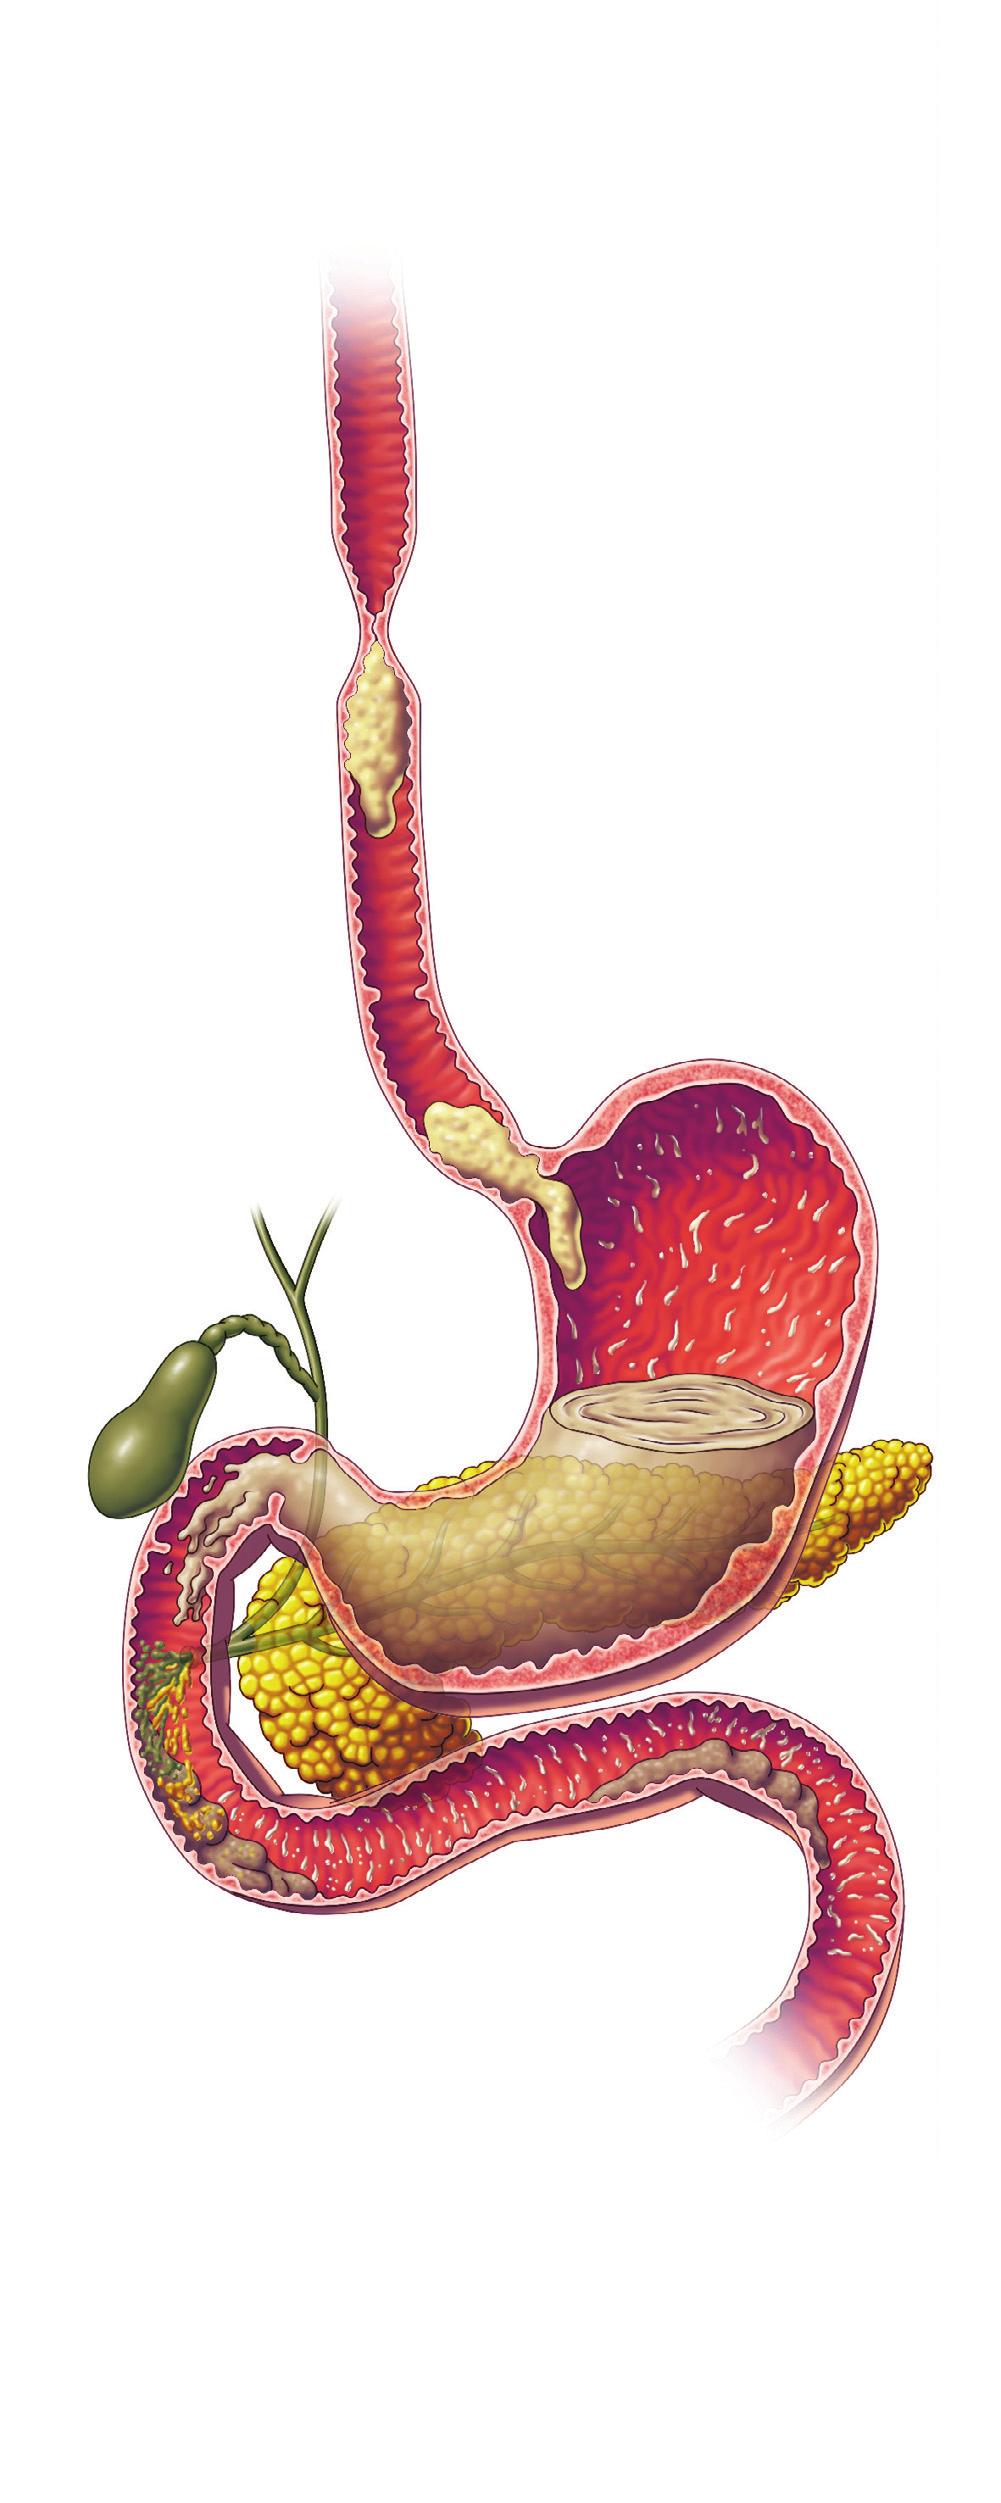 Section 2 / The Digestive System Connecting Digestion in the Stomach: The Process Continues Does your stomach ever make noises after you eat?